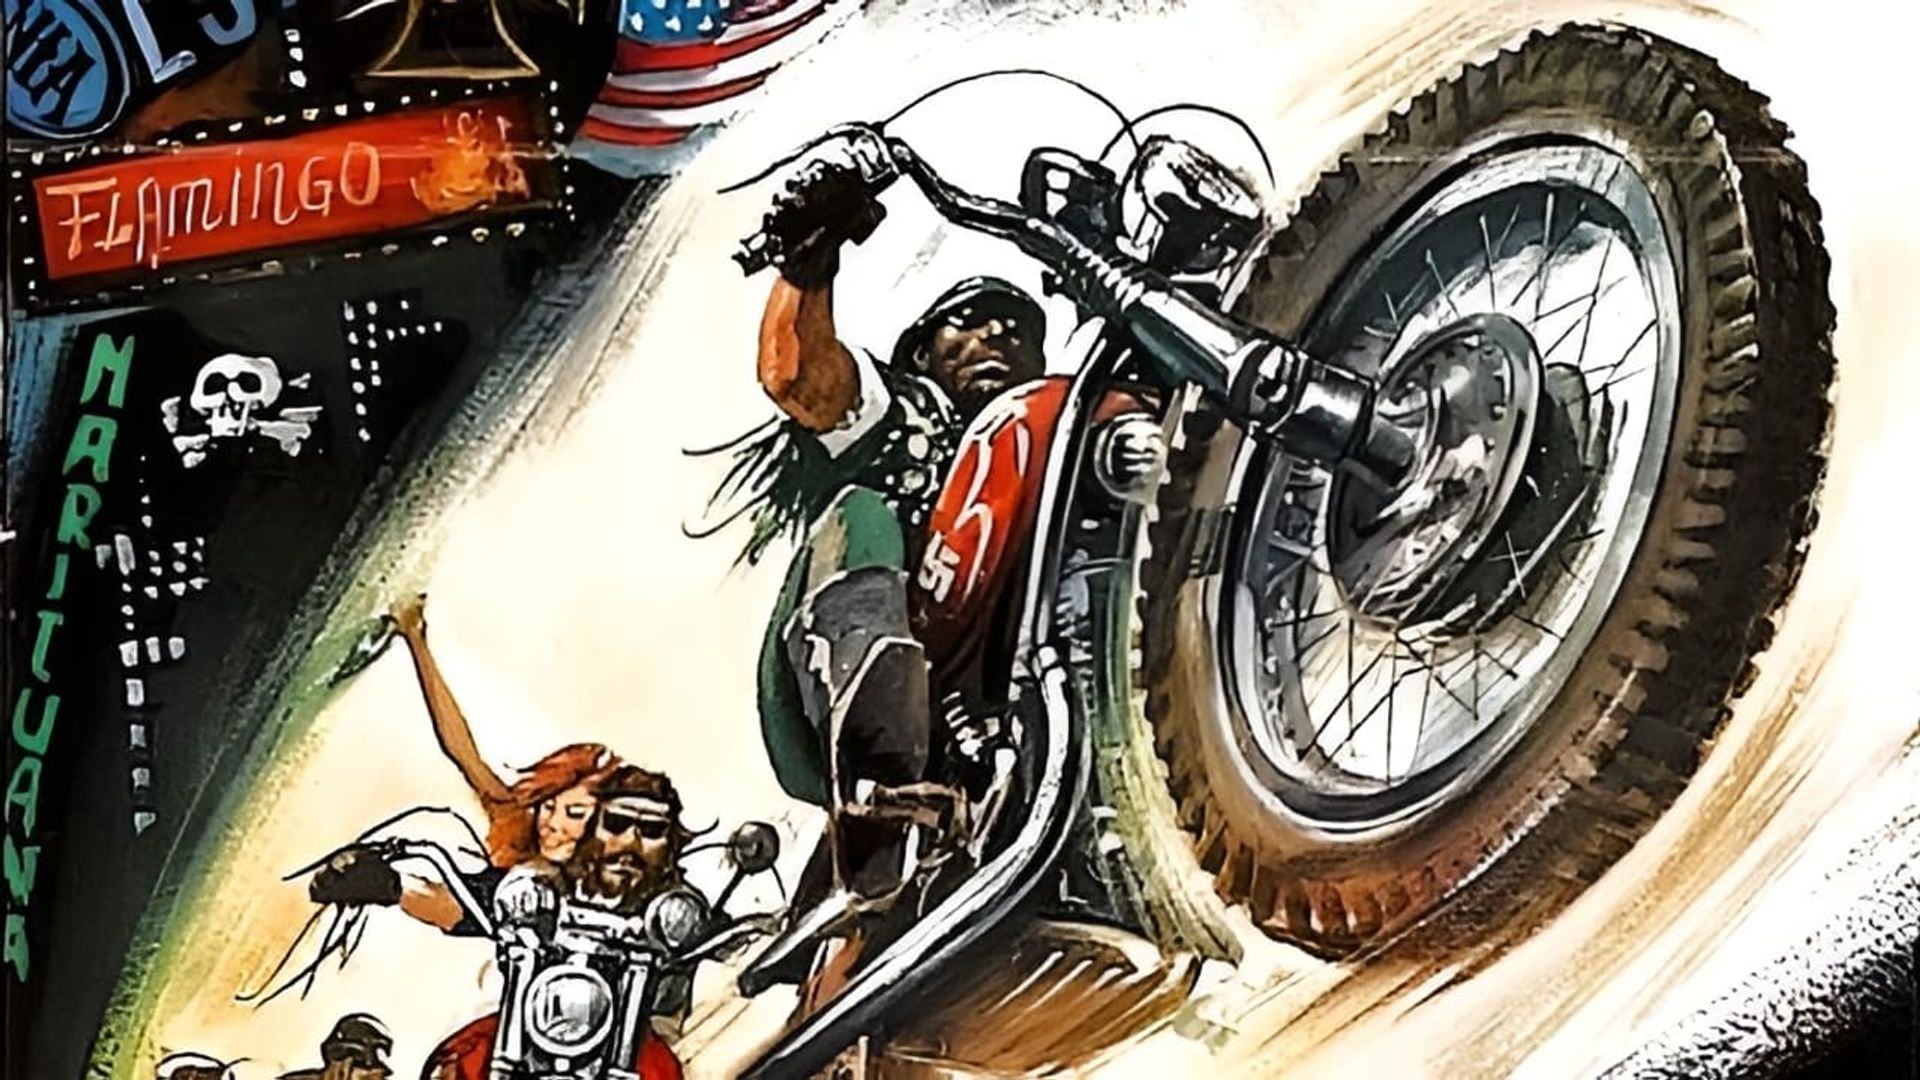 Hell's Angels '69 background